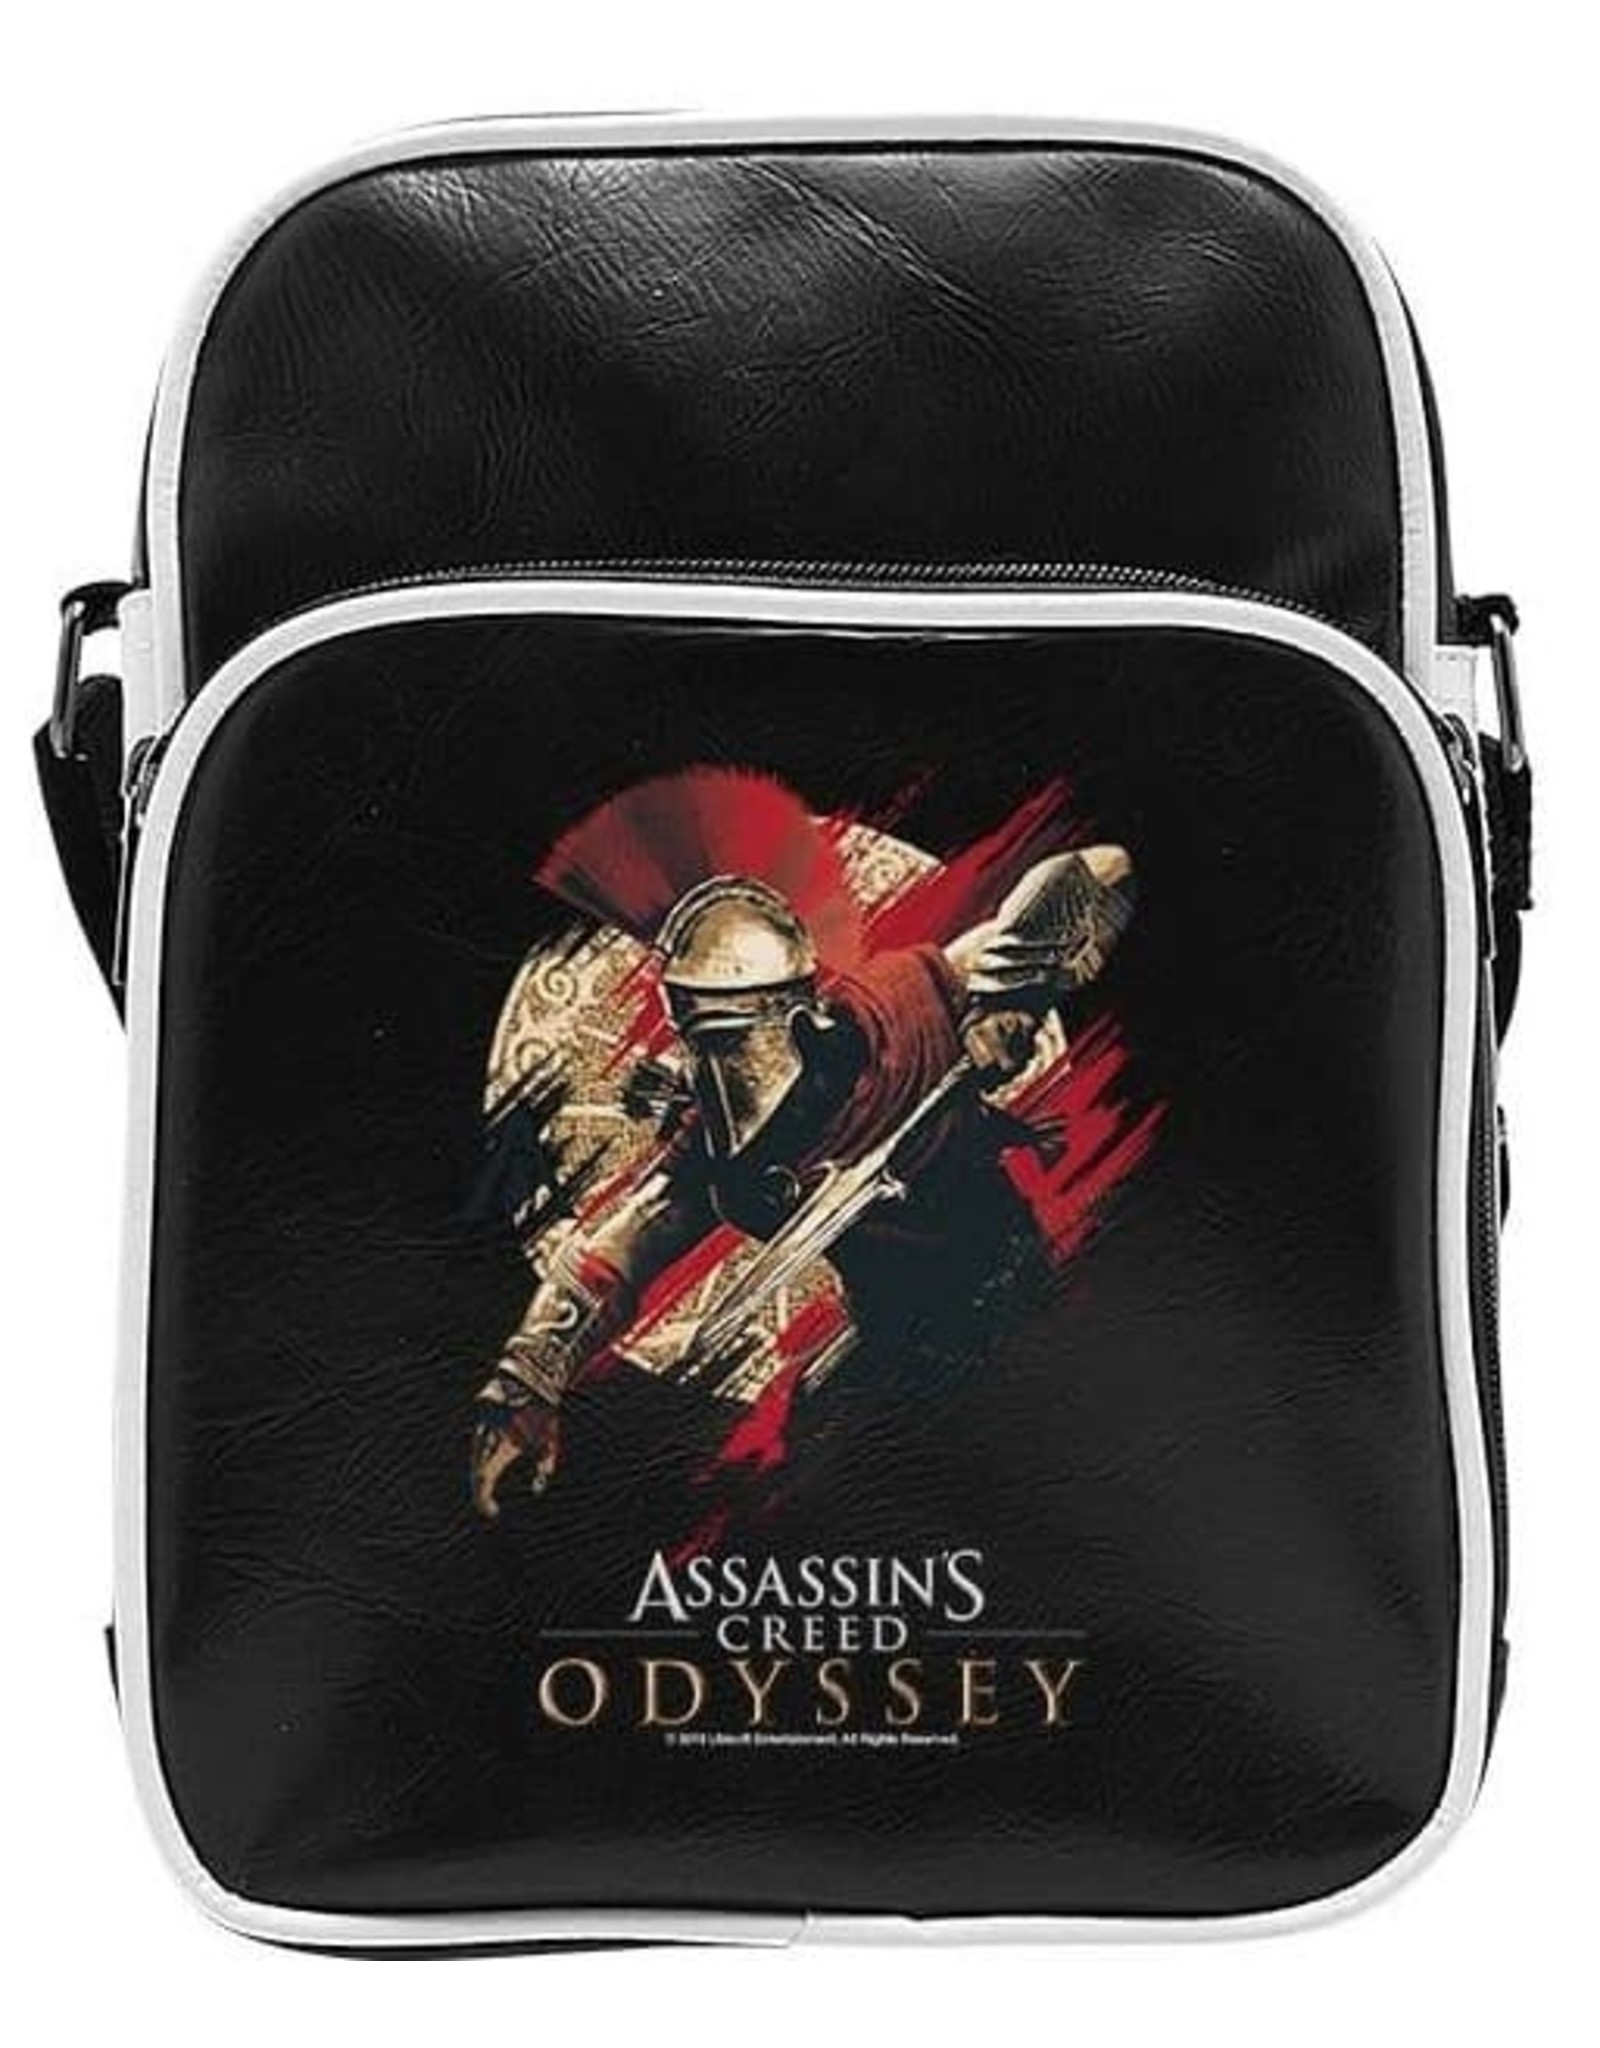 Assassins Creed Merchandise bags - Assassin's Creed Odyssey Shoulder bag